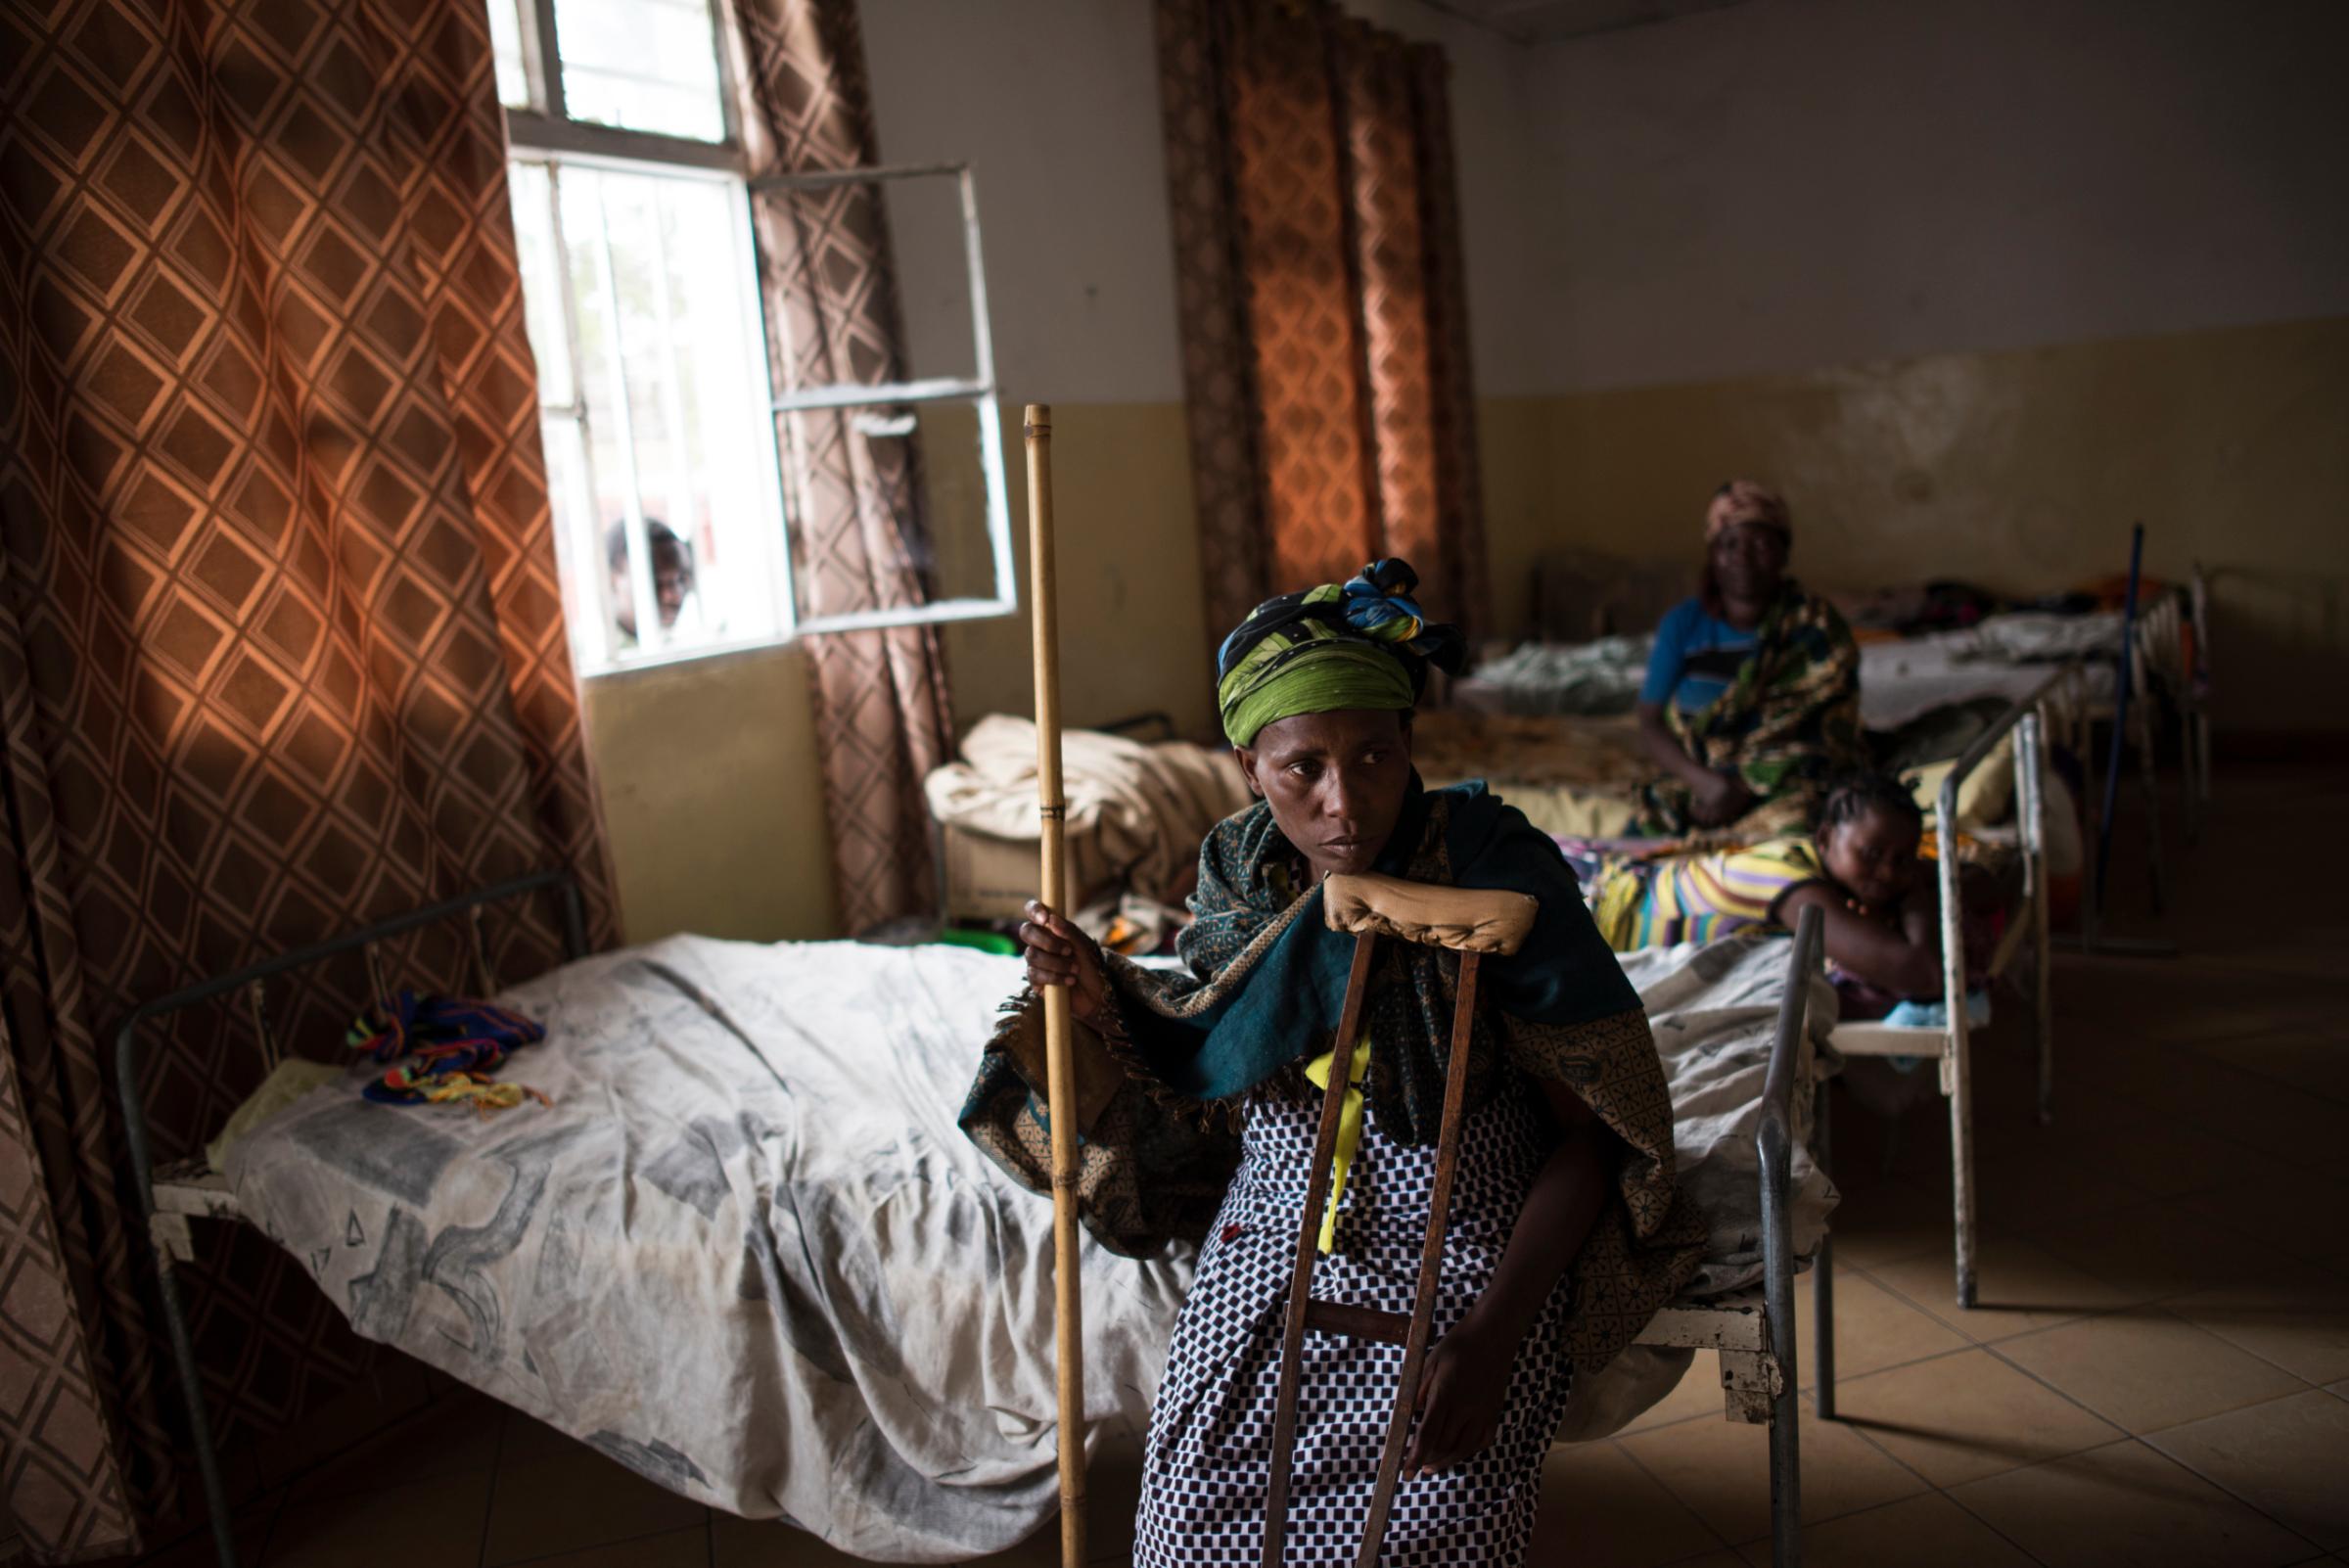 Ferediana Kimanimbaye sits with crutches after recently re-breaking her leg and returning to the Heal Africa Hospital in Goma, the Democratic Republic of Congo, Dec. 5, 2015. Ferediana was gang-raped by soldiers of the Democratic Forces for the Liberation of Rwanda (FDLR), a Hutu rebel group in eastern DRC, when they attacked her village more than 7 years ago. They killed her husband, and three different men raped her. She fell and broke her leg while she was escaping. The U.N. reports that 200,000 Congolese women and children have been raped during Congo’s long-simmering conflict.